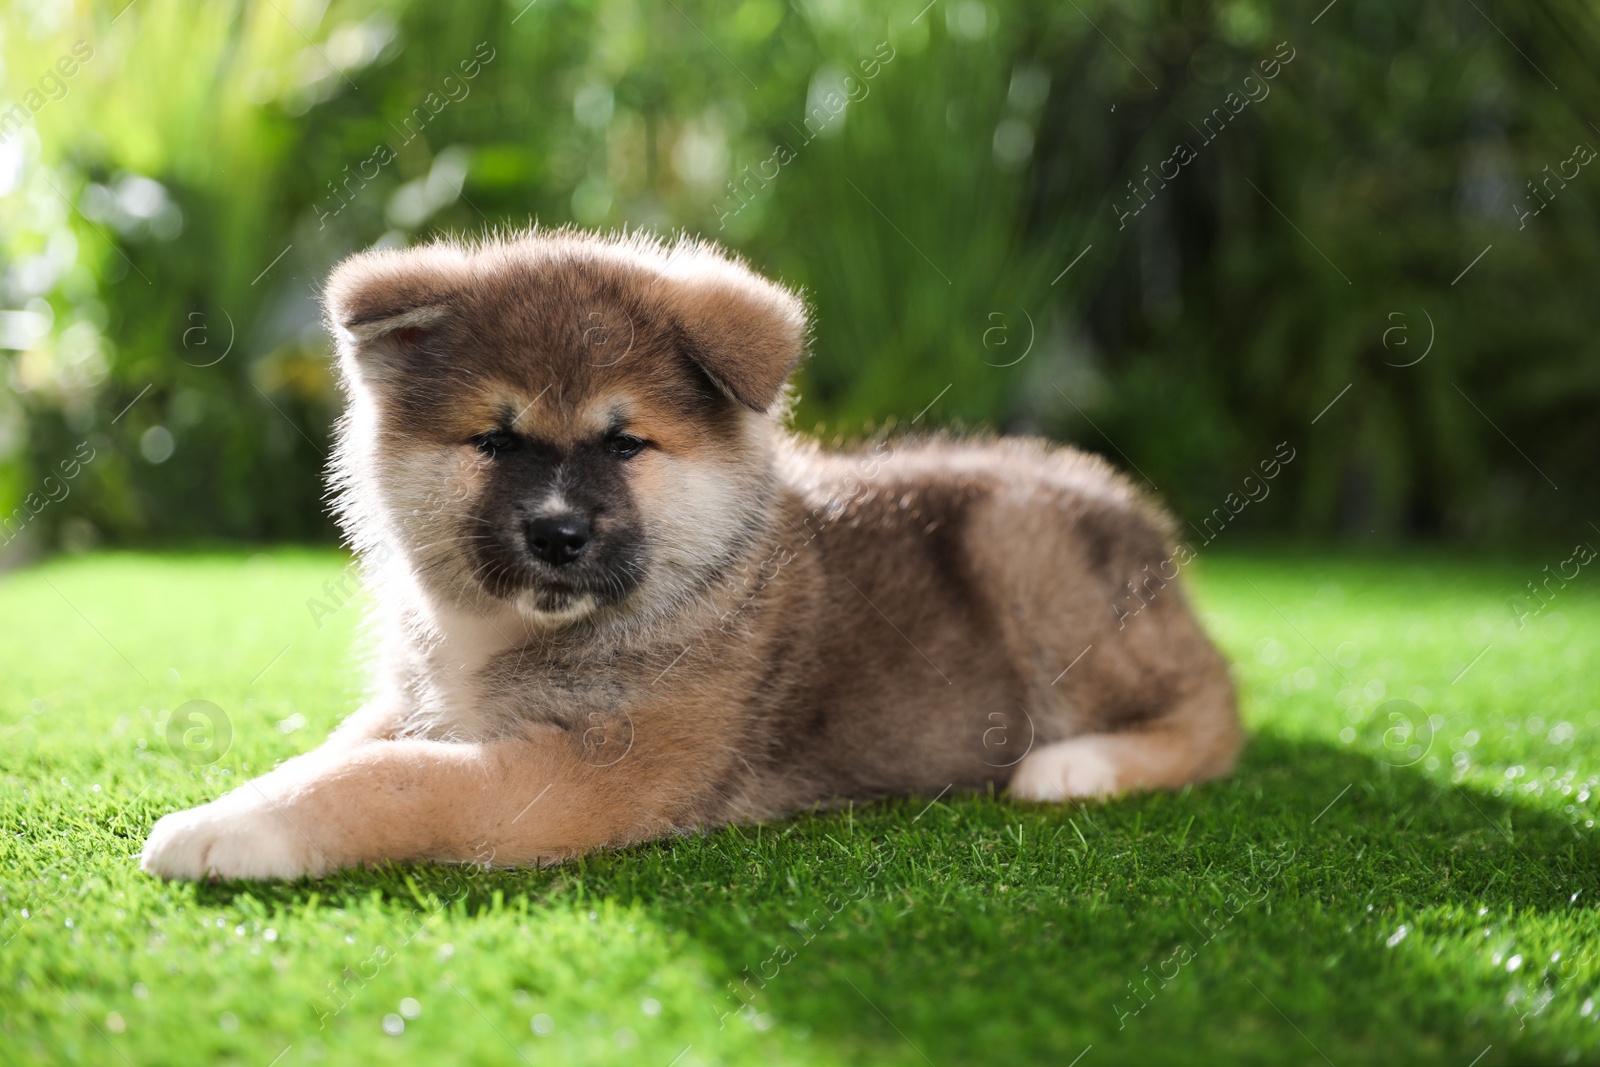 Photo of Adorable Akita Inu puppy on green grass outdoors